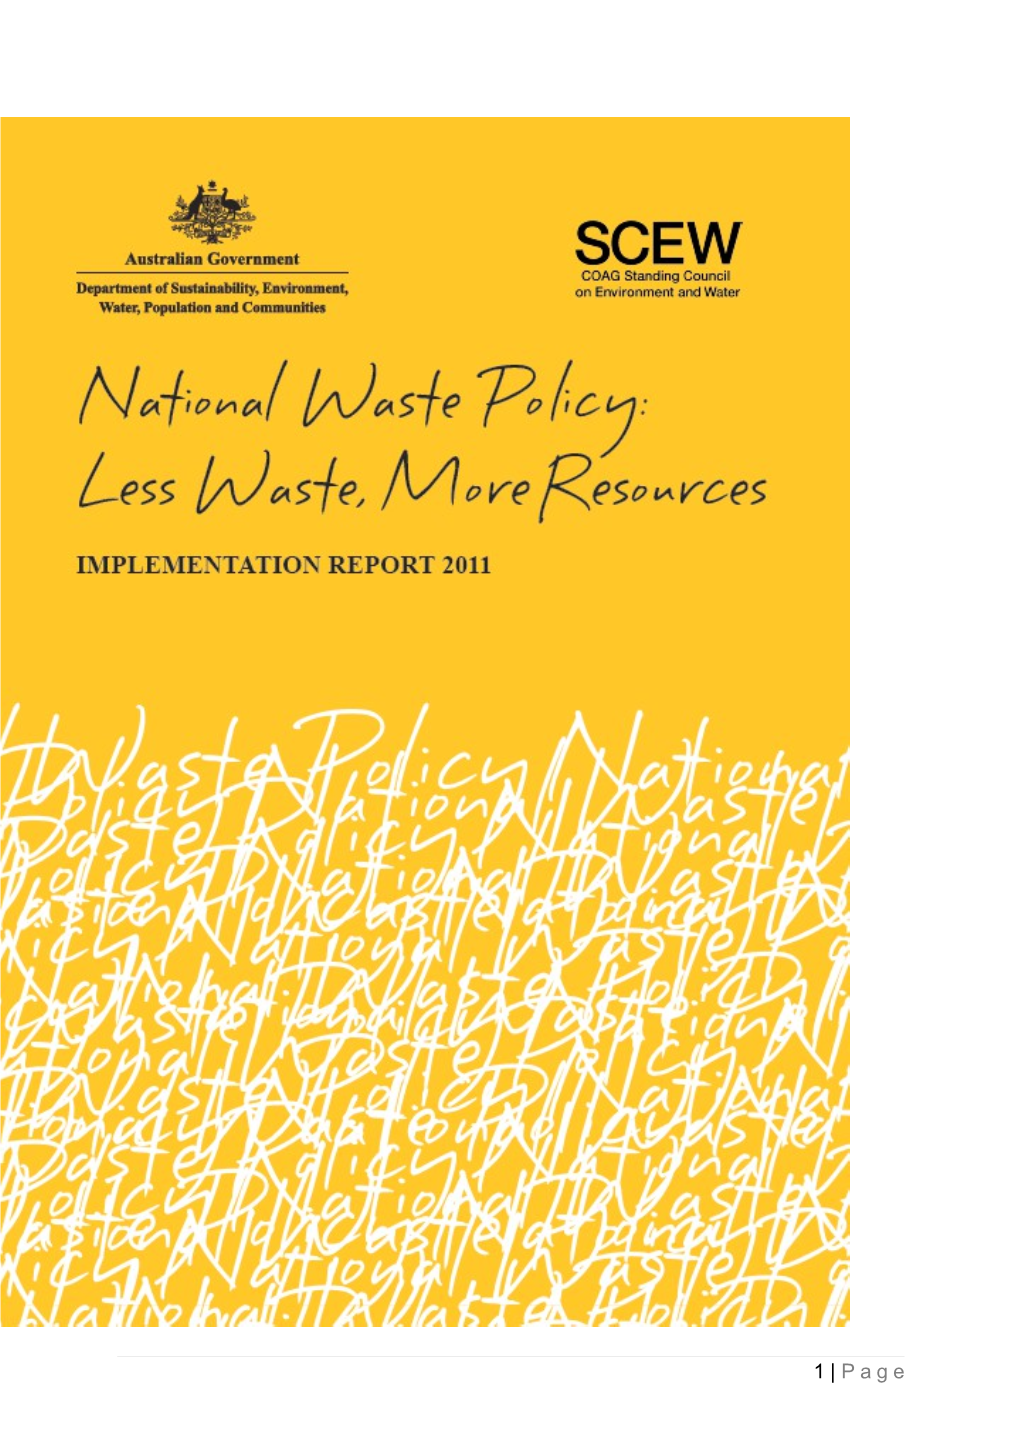 Implementation Report 2011 - National Waste Policy: Less Waste, More Resources